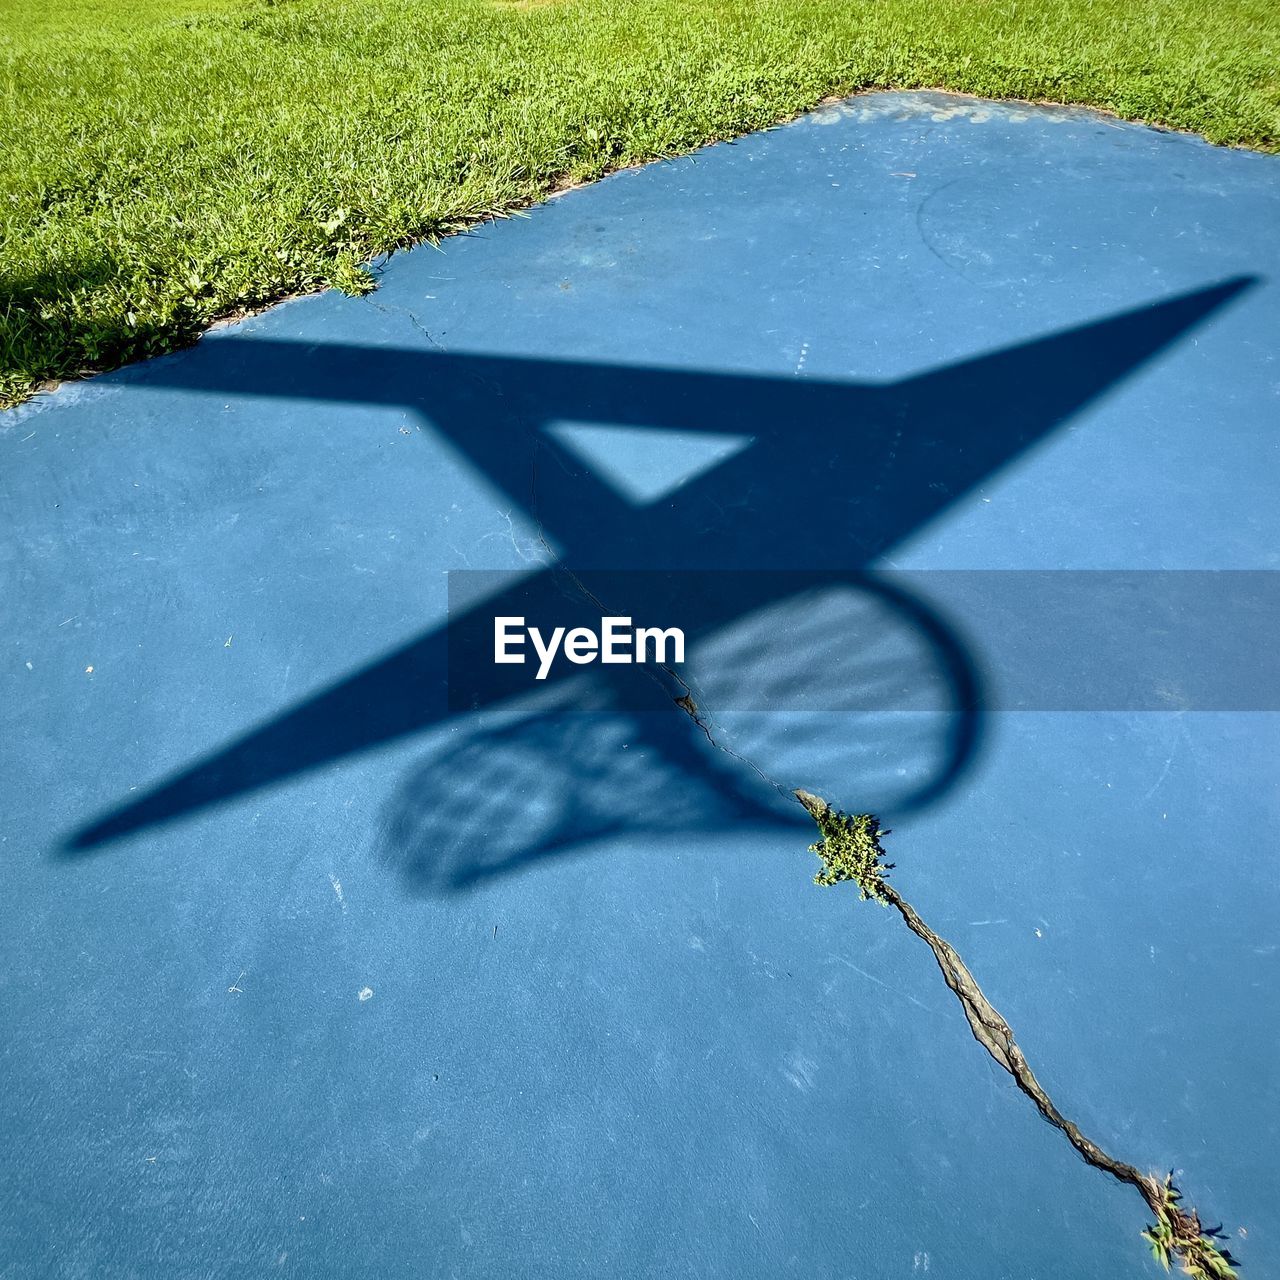 Shadow of basketball hoop on cracked blue court.